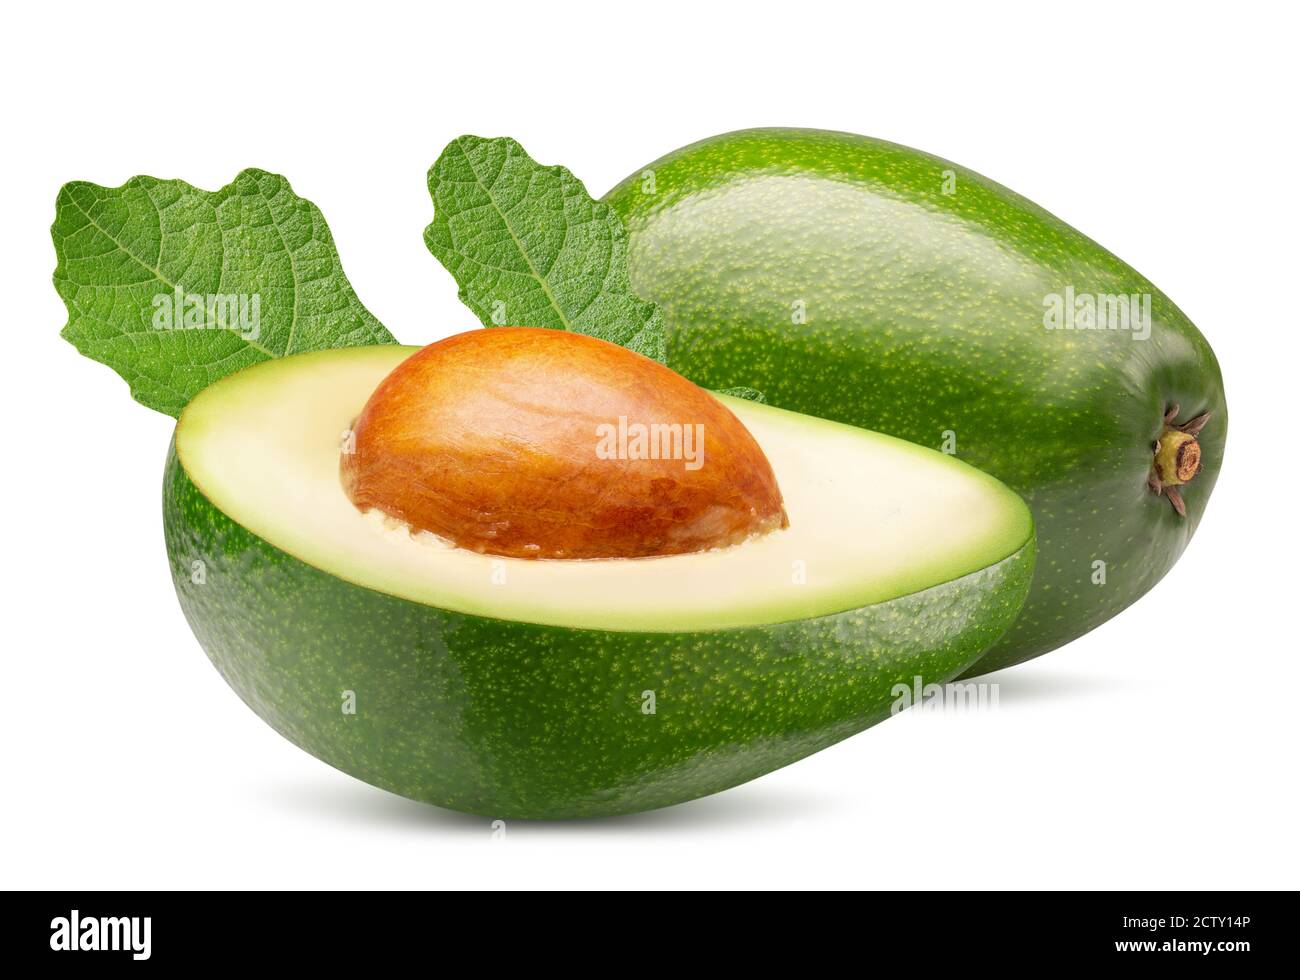 avocado with half of avocado and green leaves isolated on a white background. Stock Photo